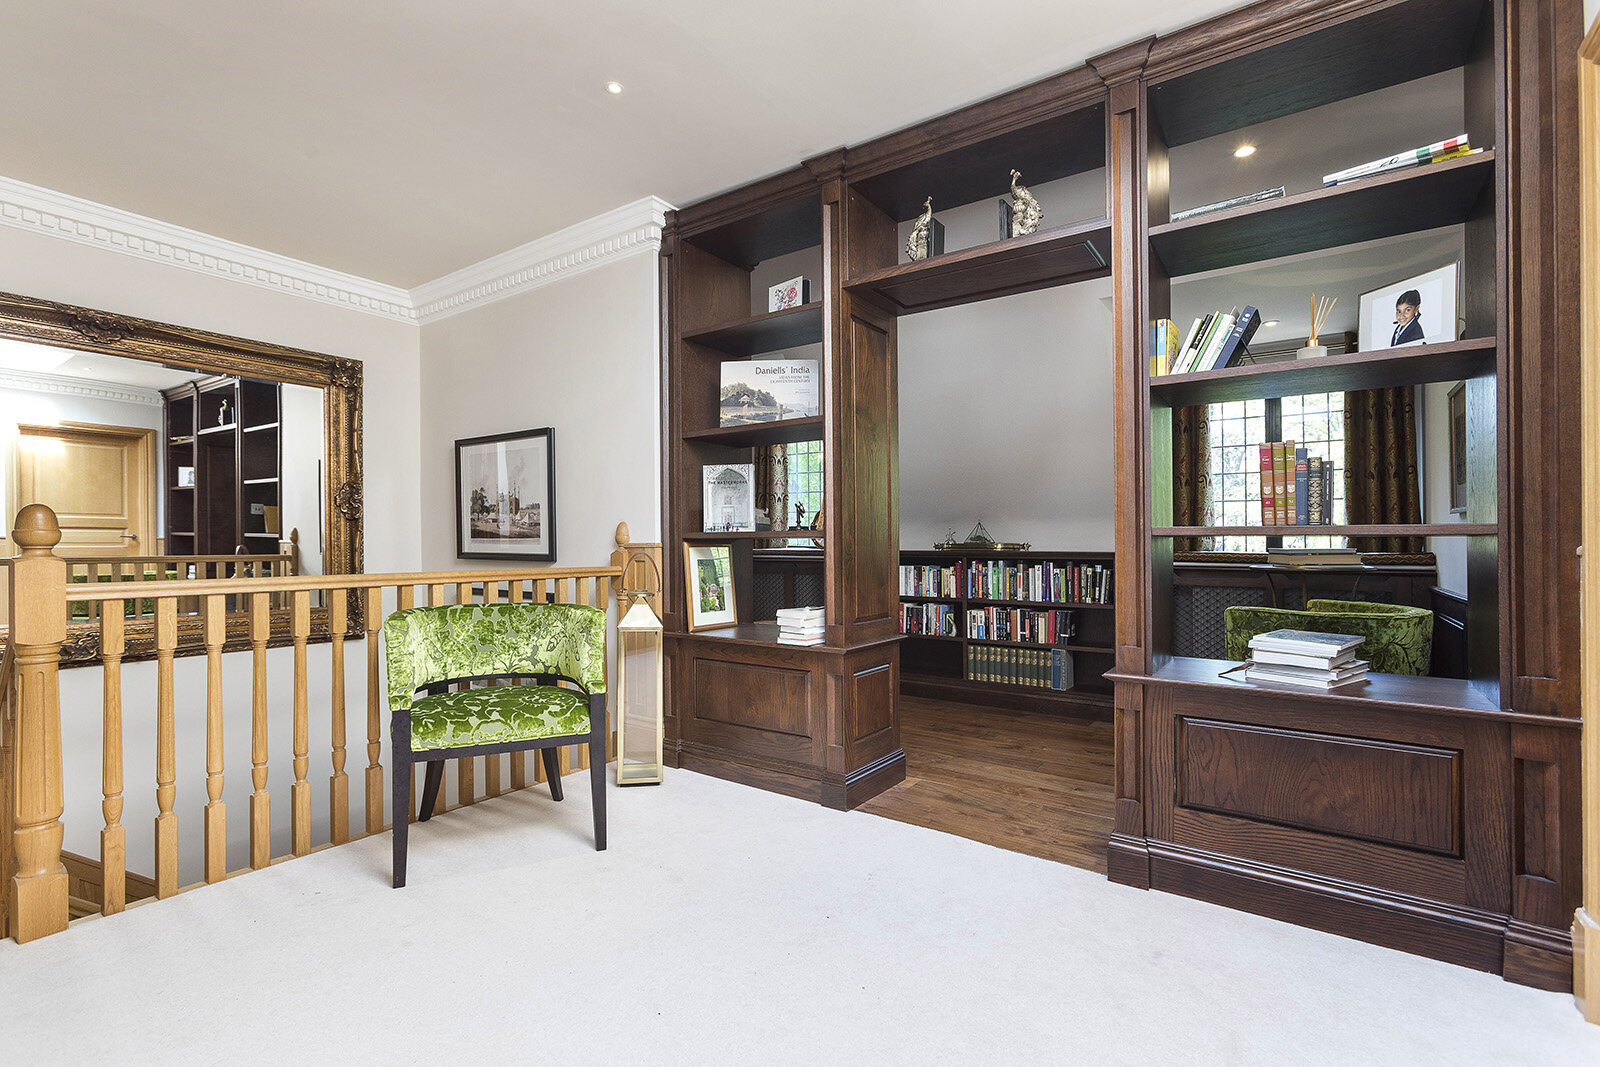 private wooden bespoke furniture library interior photos thebestshot.co.uk.jpg